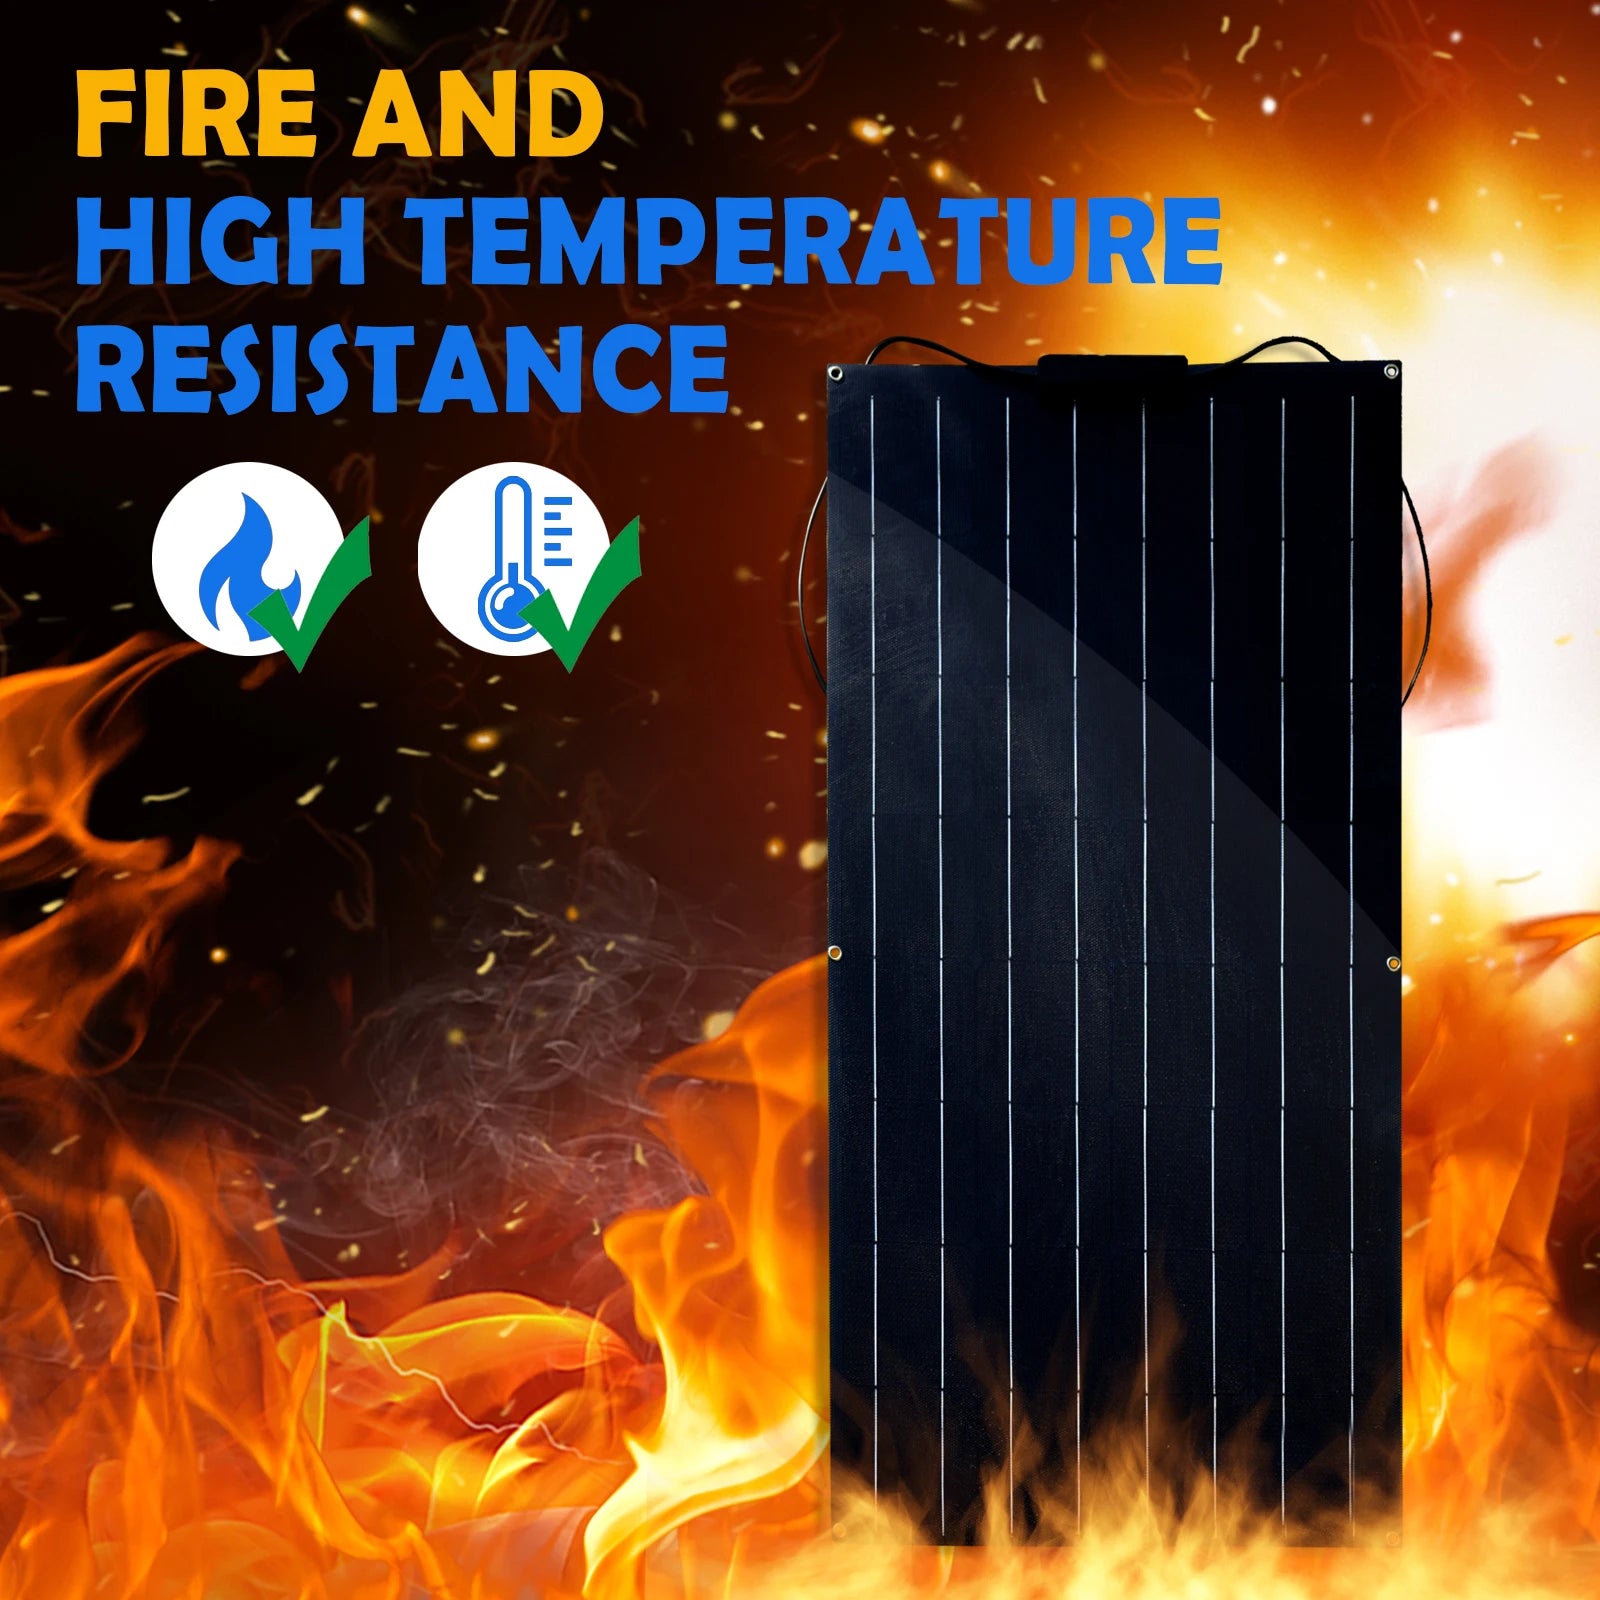 JINGYANG long lasting Semi Flexible solar panel, Fire-resistant and high-temperature tolerant for safe operation.